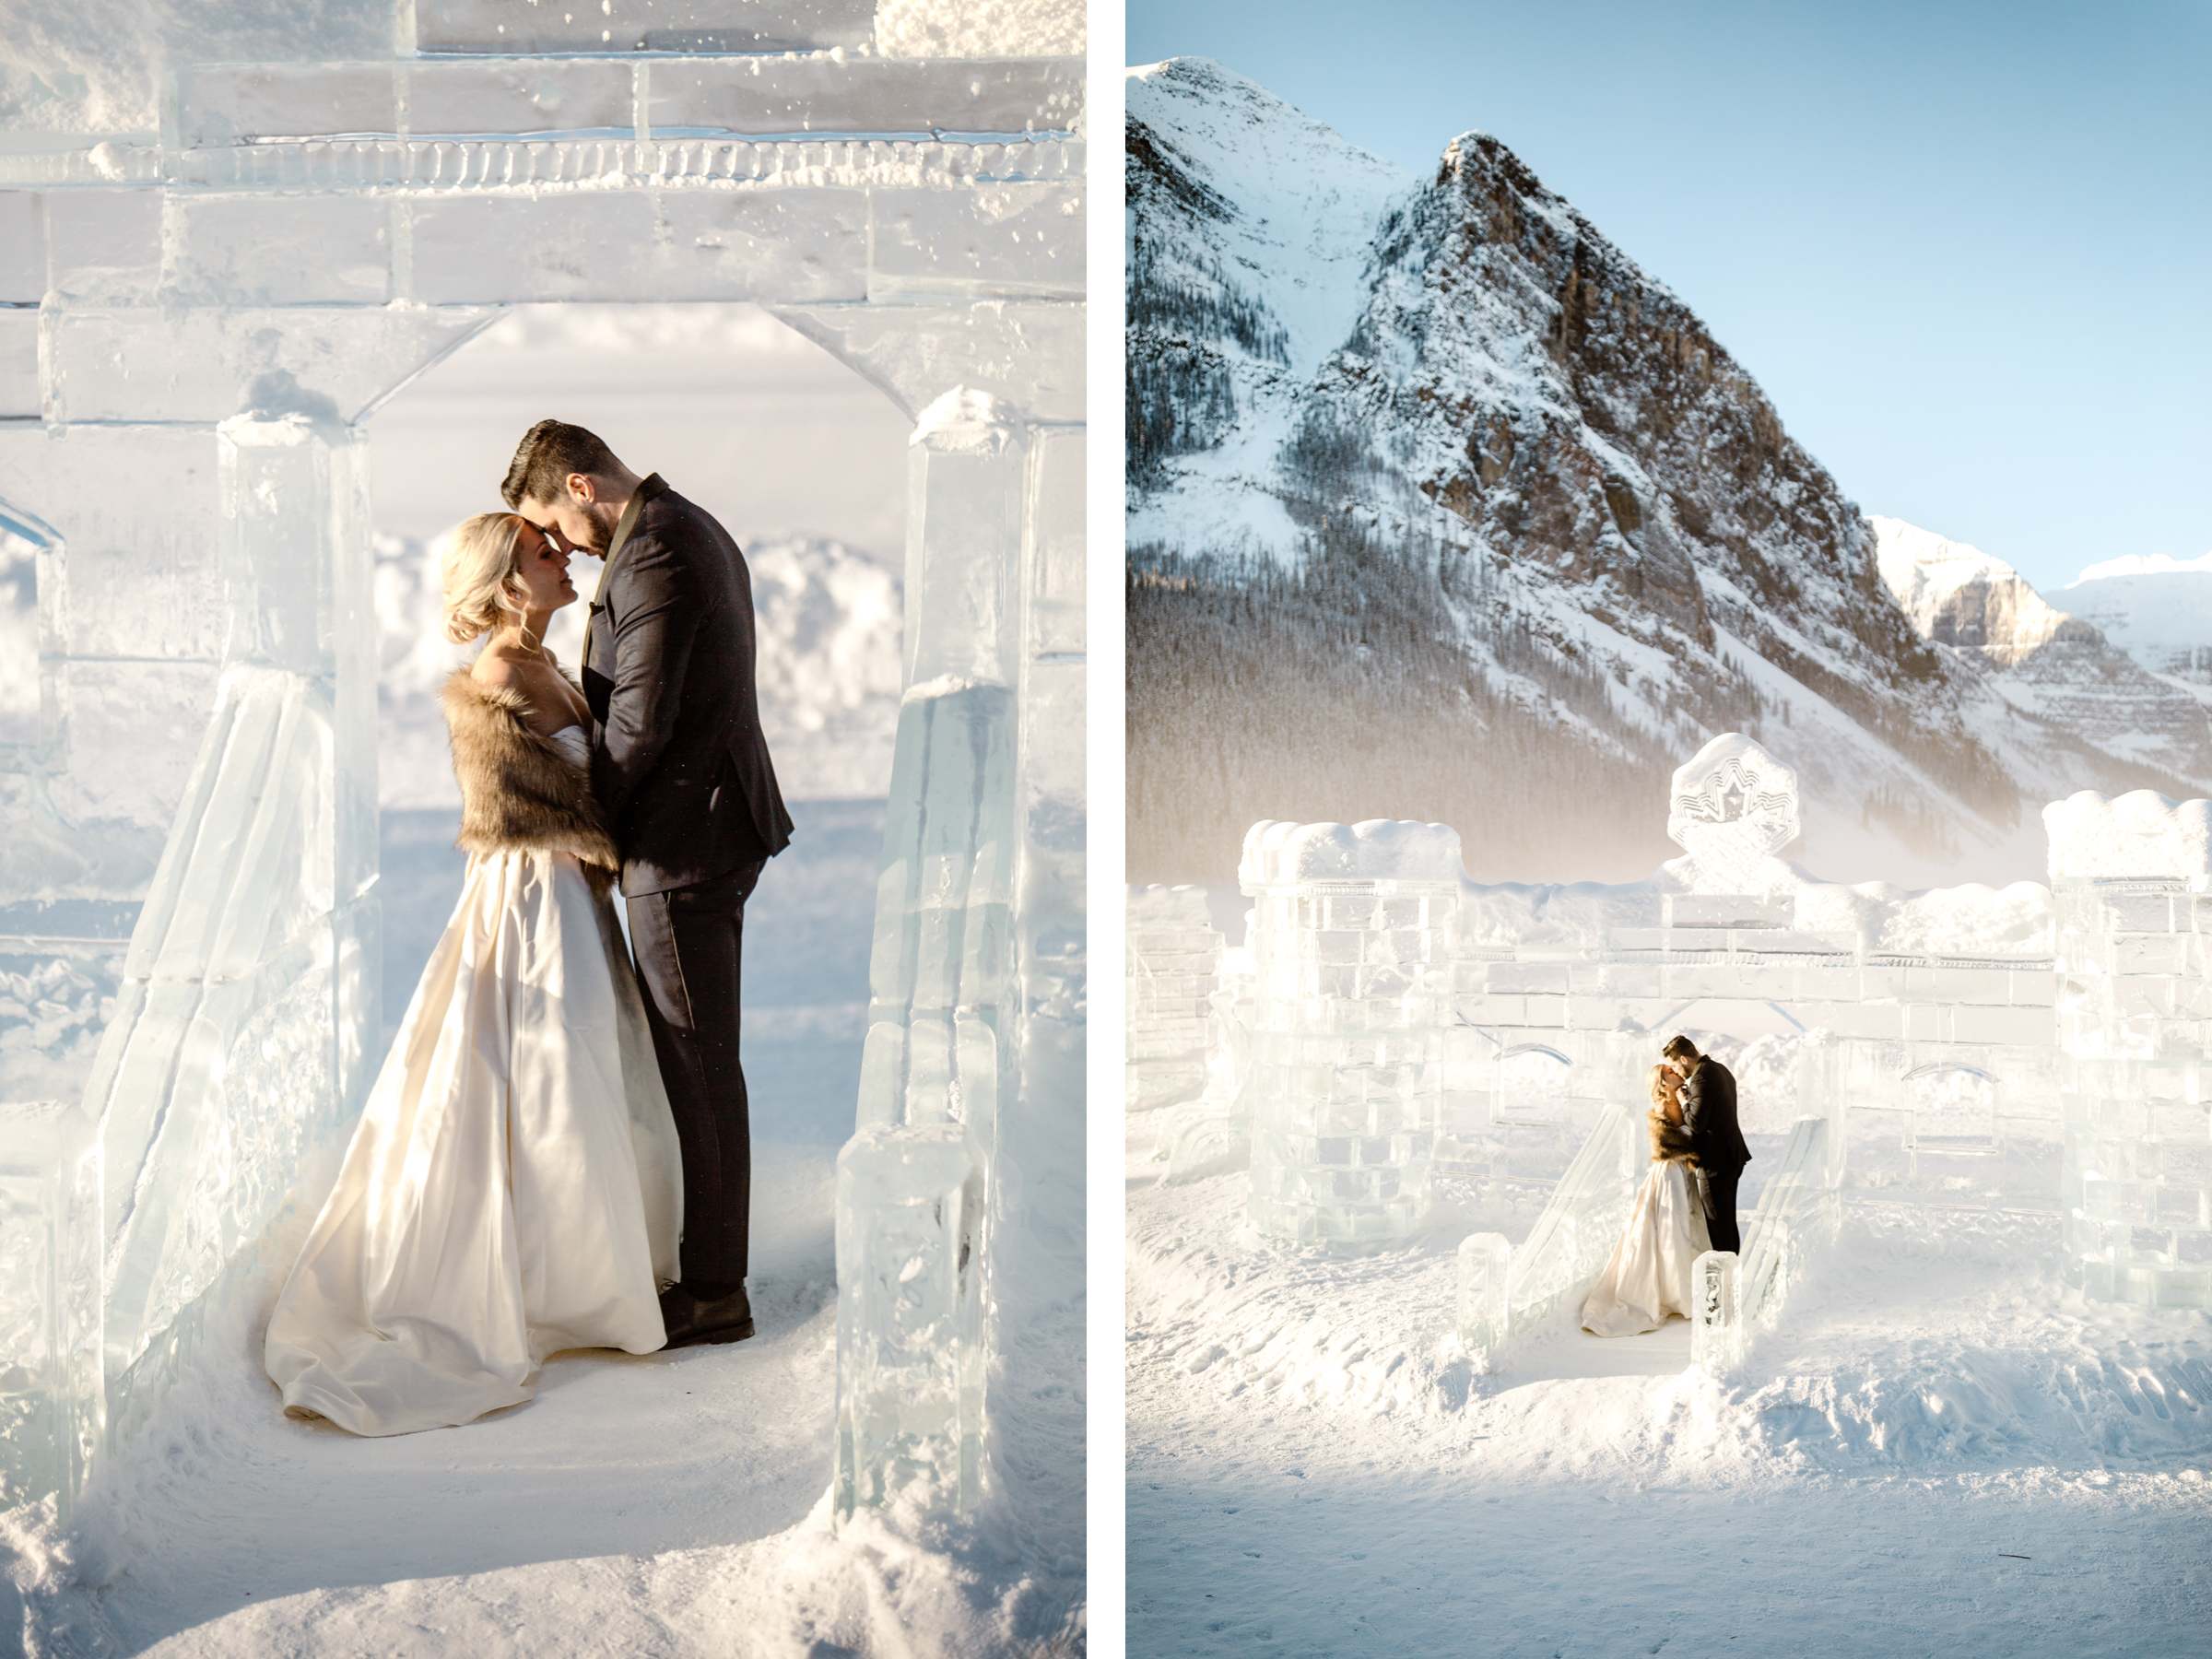 Fairmont Chateau Lake Louise Wedding Photography in Winter - Image 9